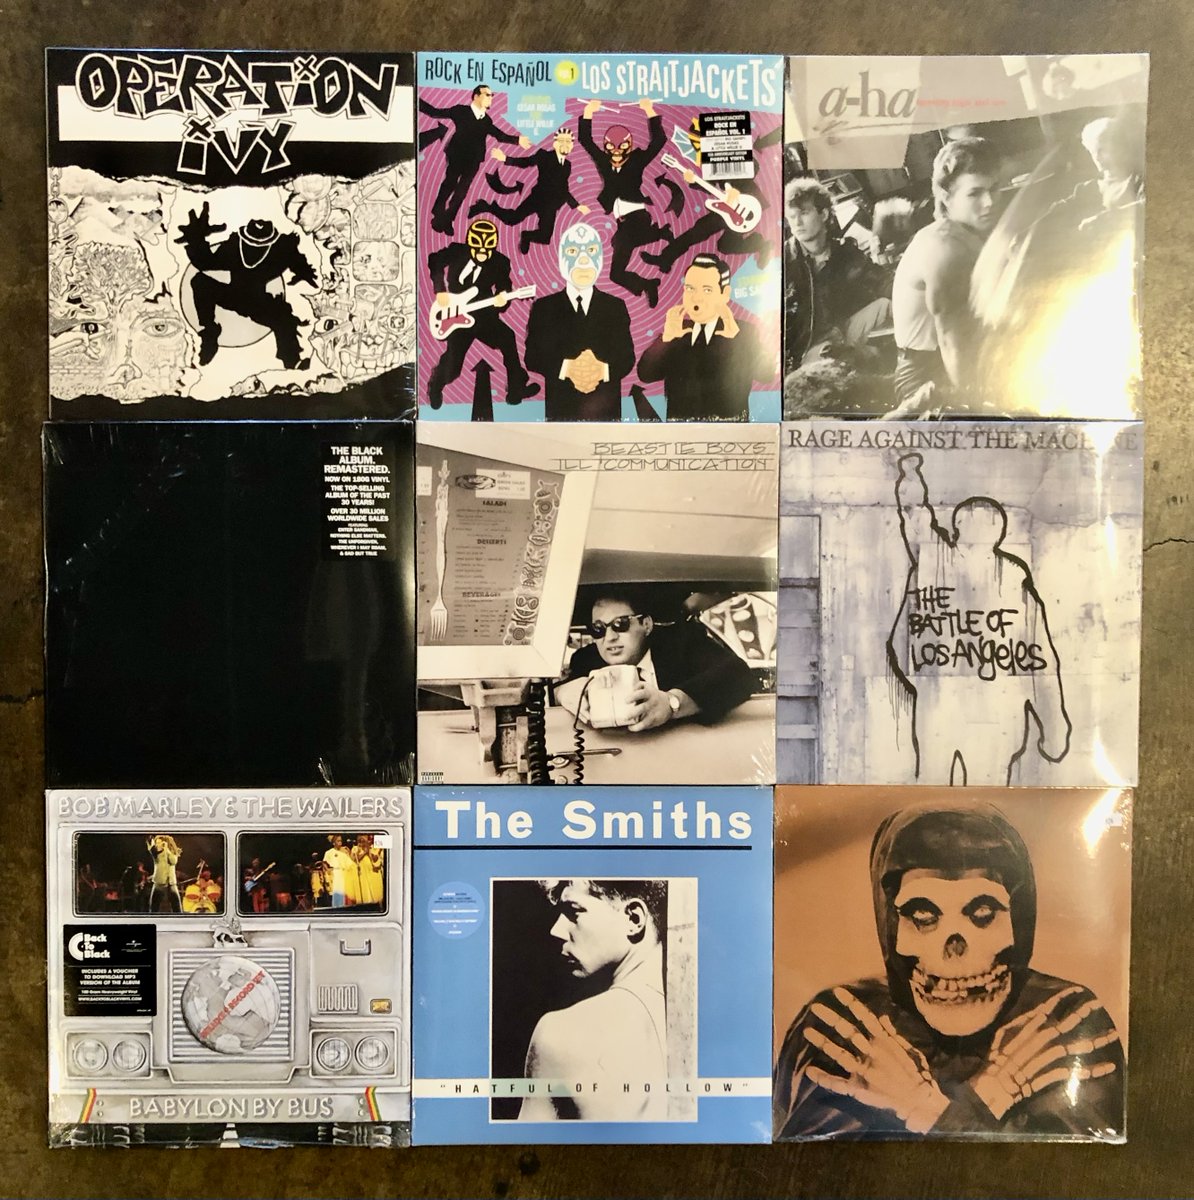 Fresh jams for your listening pleasure. Check em' out. Mmmkaaay?

#Plan9Alehouse #DowntownEscondido #Vinyl #Records #SupportYourLocalRecordStore #Music #Brewery #ScratchKitchen #Restaurant #WeekendVibes #SDBeer #VinylRecords #VinylNotVinyls #Fun #Family #Jams